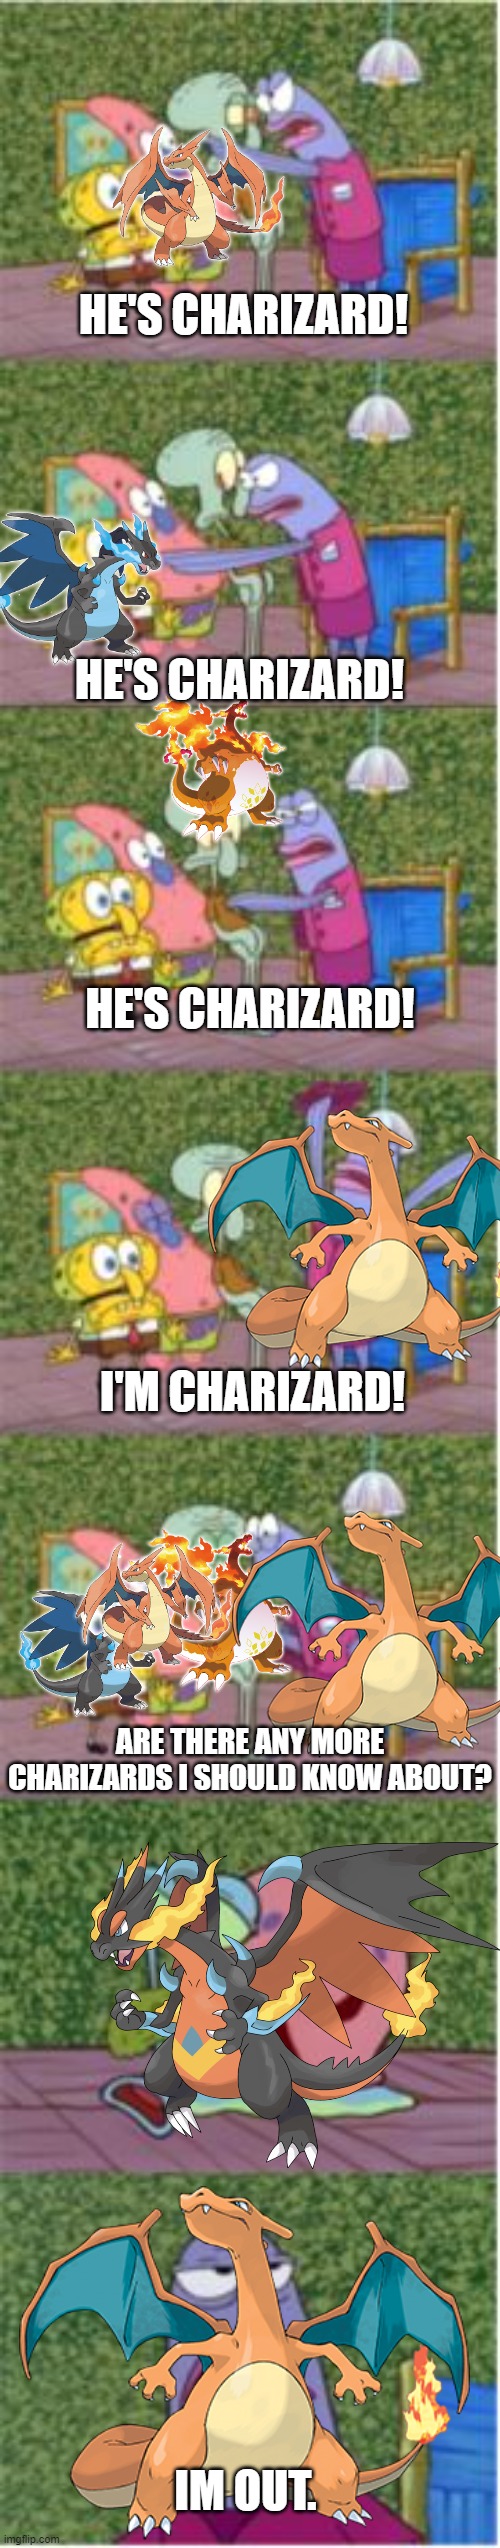 [insert chaos here] | HE'S CHARIZARD! HE'S CHARIZARD! HE'S CHARIZARD! I'M CHARIZARD! ARE THERE ANY MORE CHARIZARDS I SHOULD KNOW ABOUT? IM OUT. | image tagged in he's squidward | made w/ Imgflip meme maker